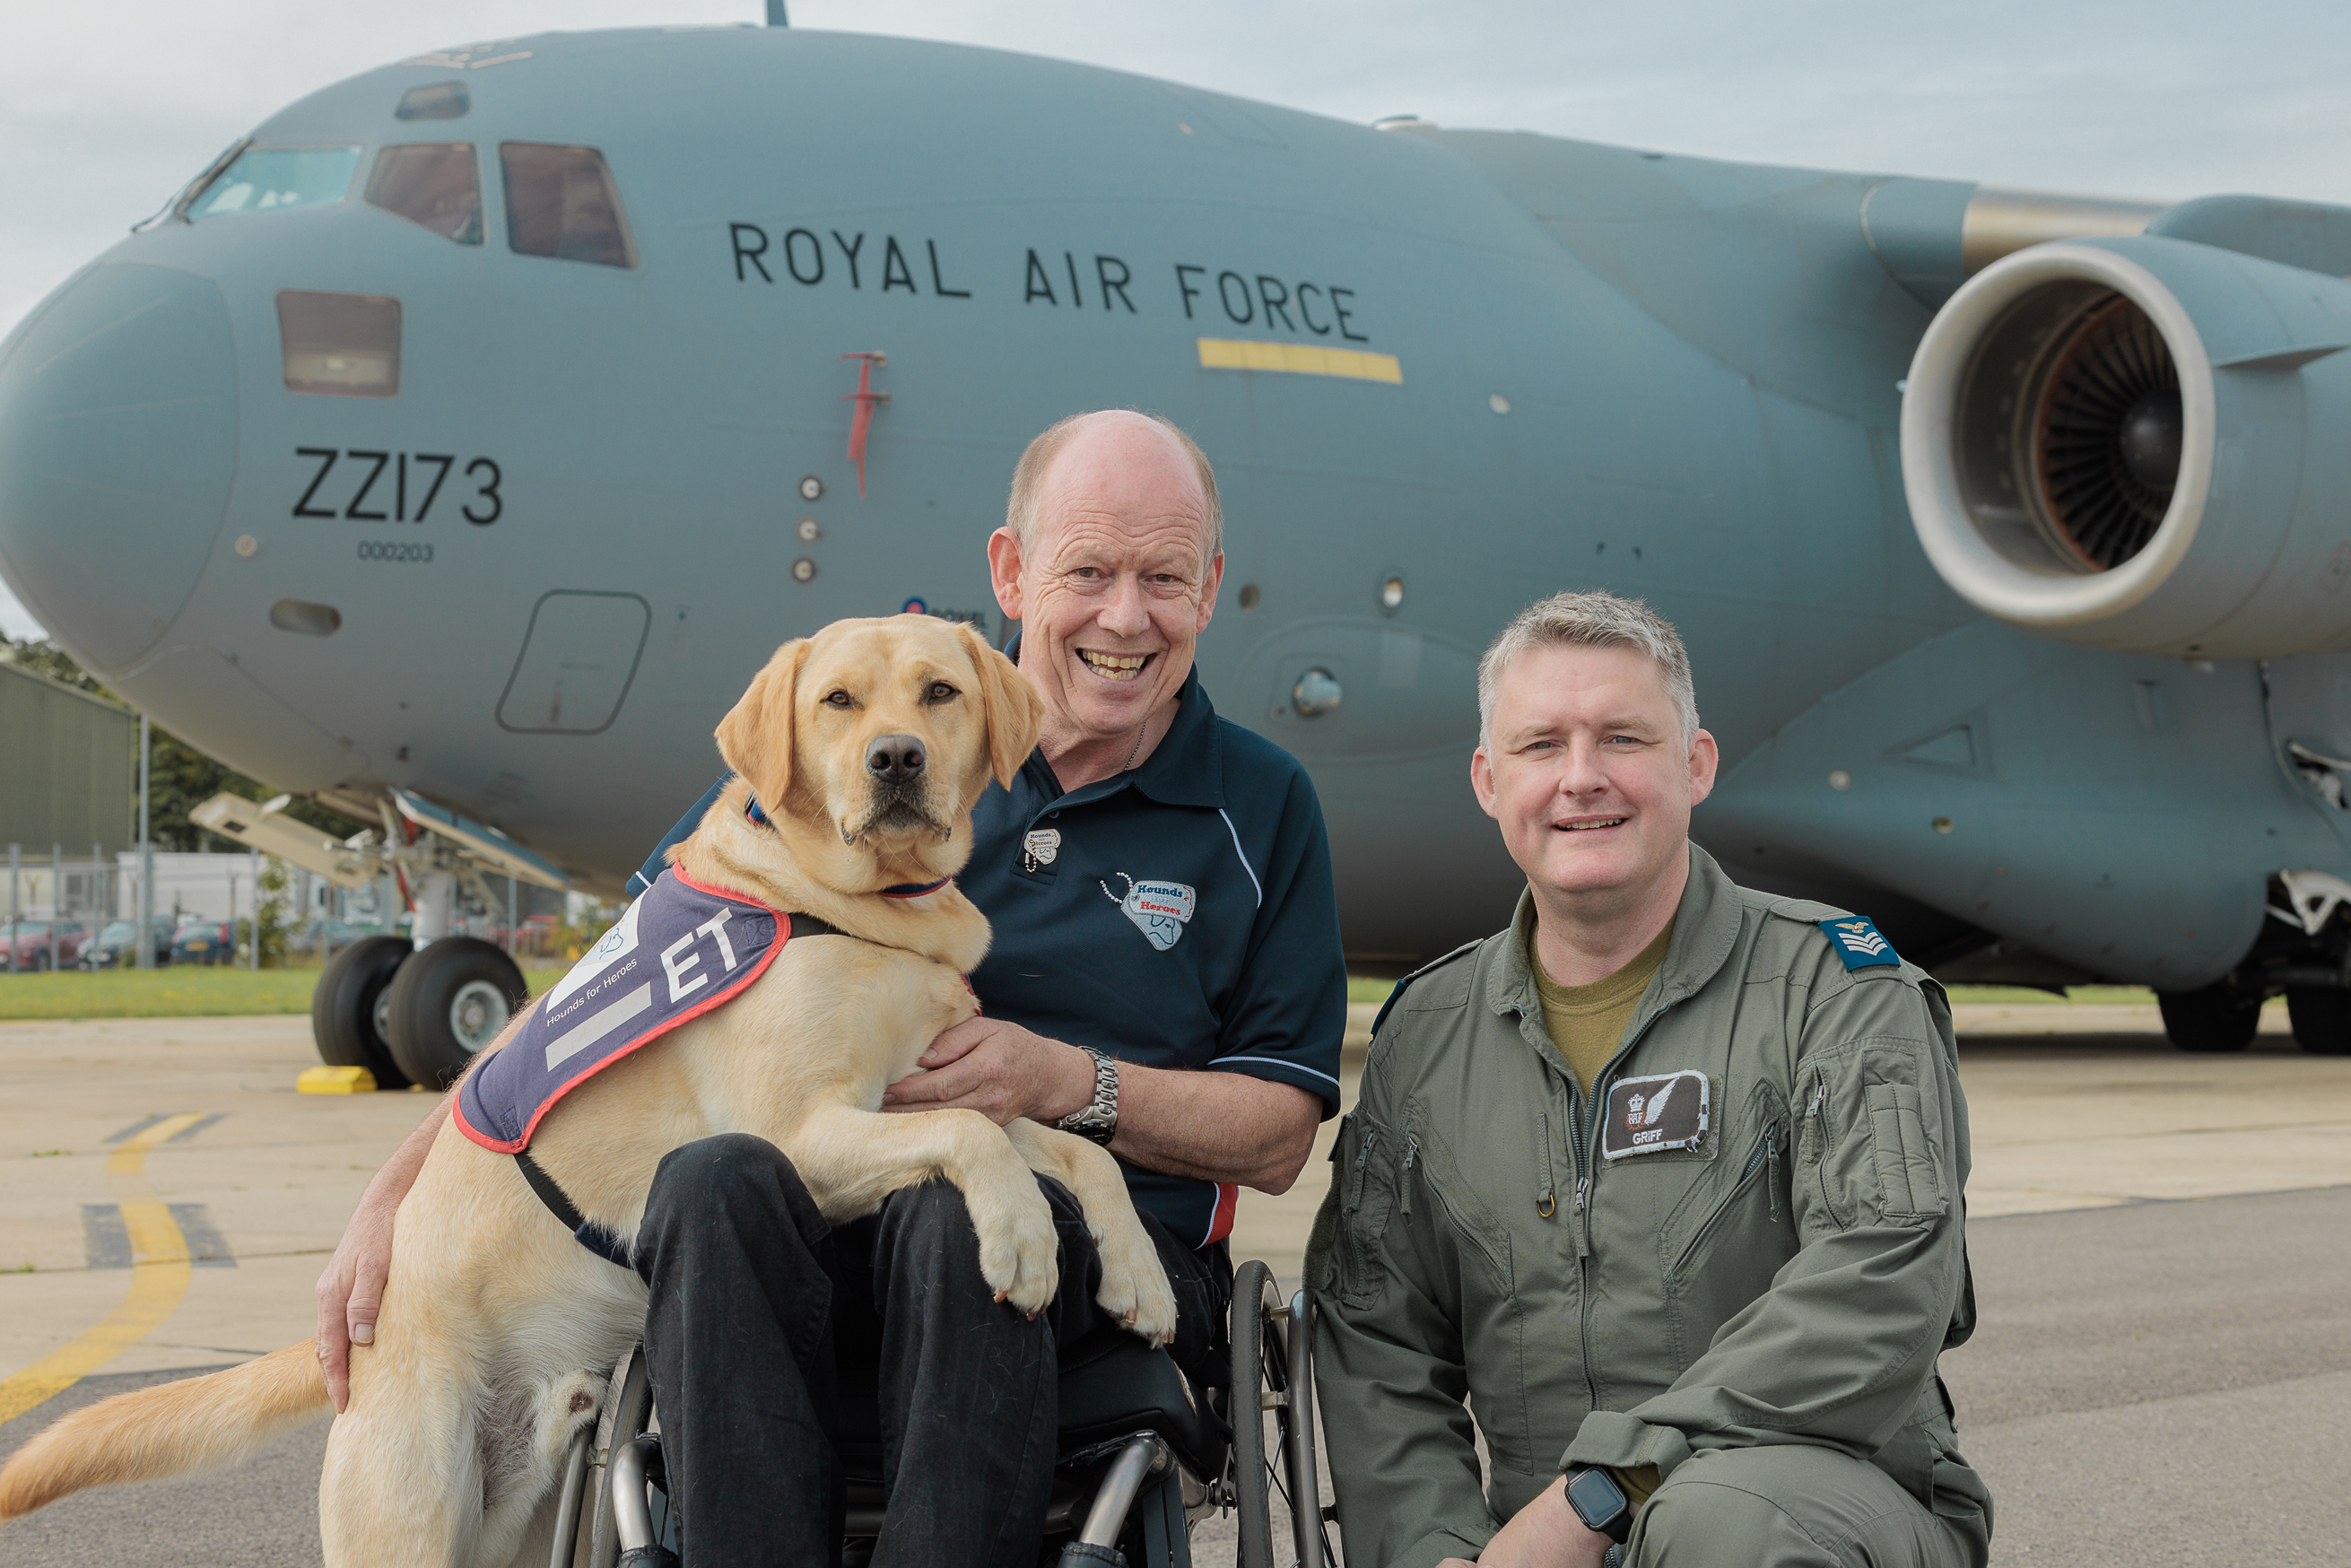 Photo - Hounds for Heroes founder Allen Parton and assistance dog ET posed with 99 Squadron aircrew in front of a Globemaster (C-17) aircraft